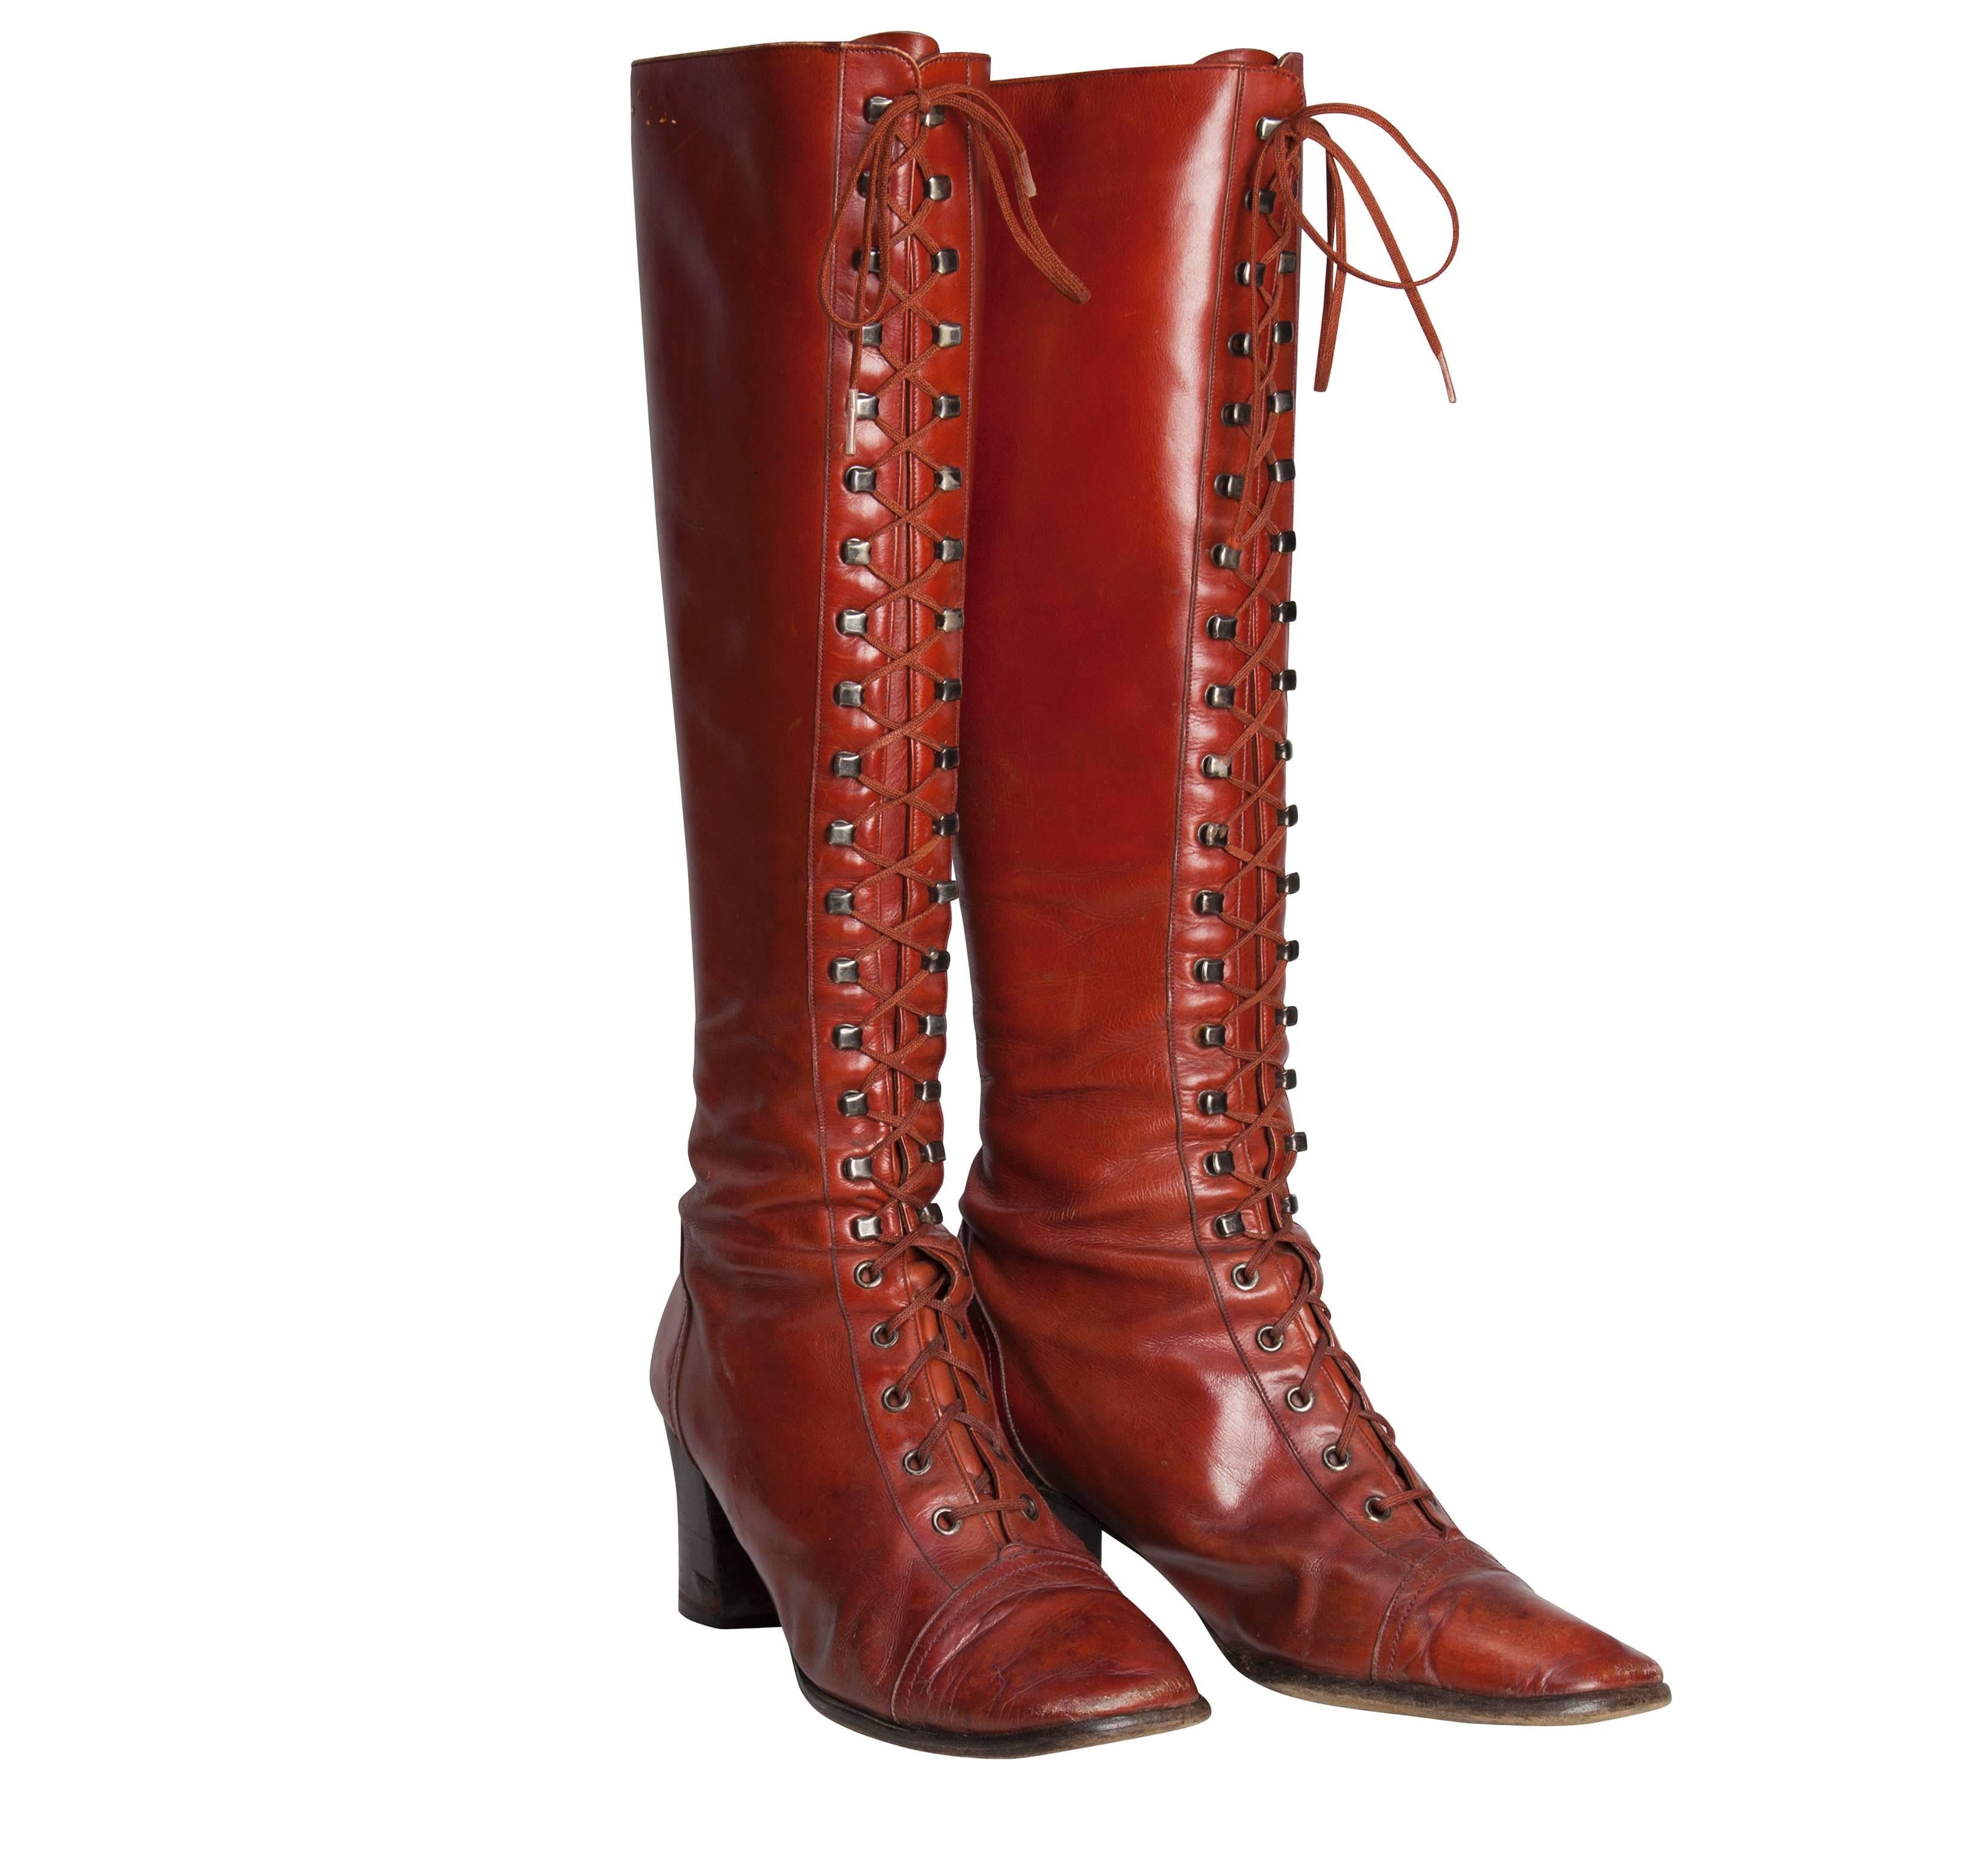 1970s Yves Saint Laurent Couture Brick Red Leather Heeled Lace-Up Tall Boots In Good Condition For Sale In London, GB